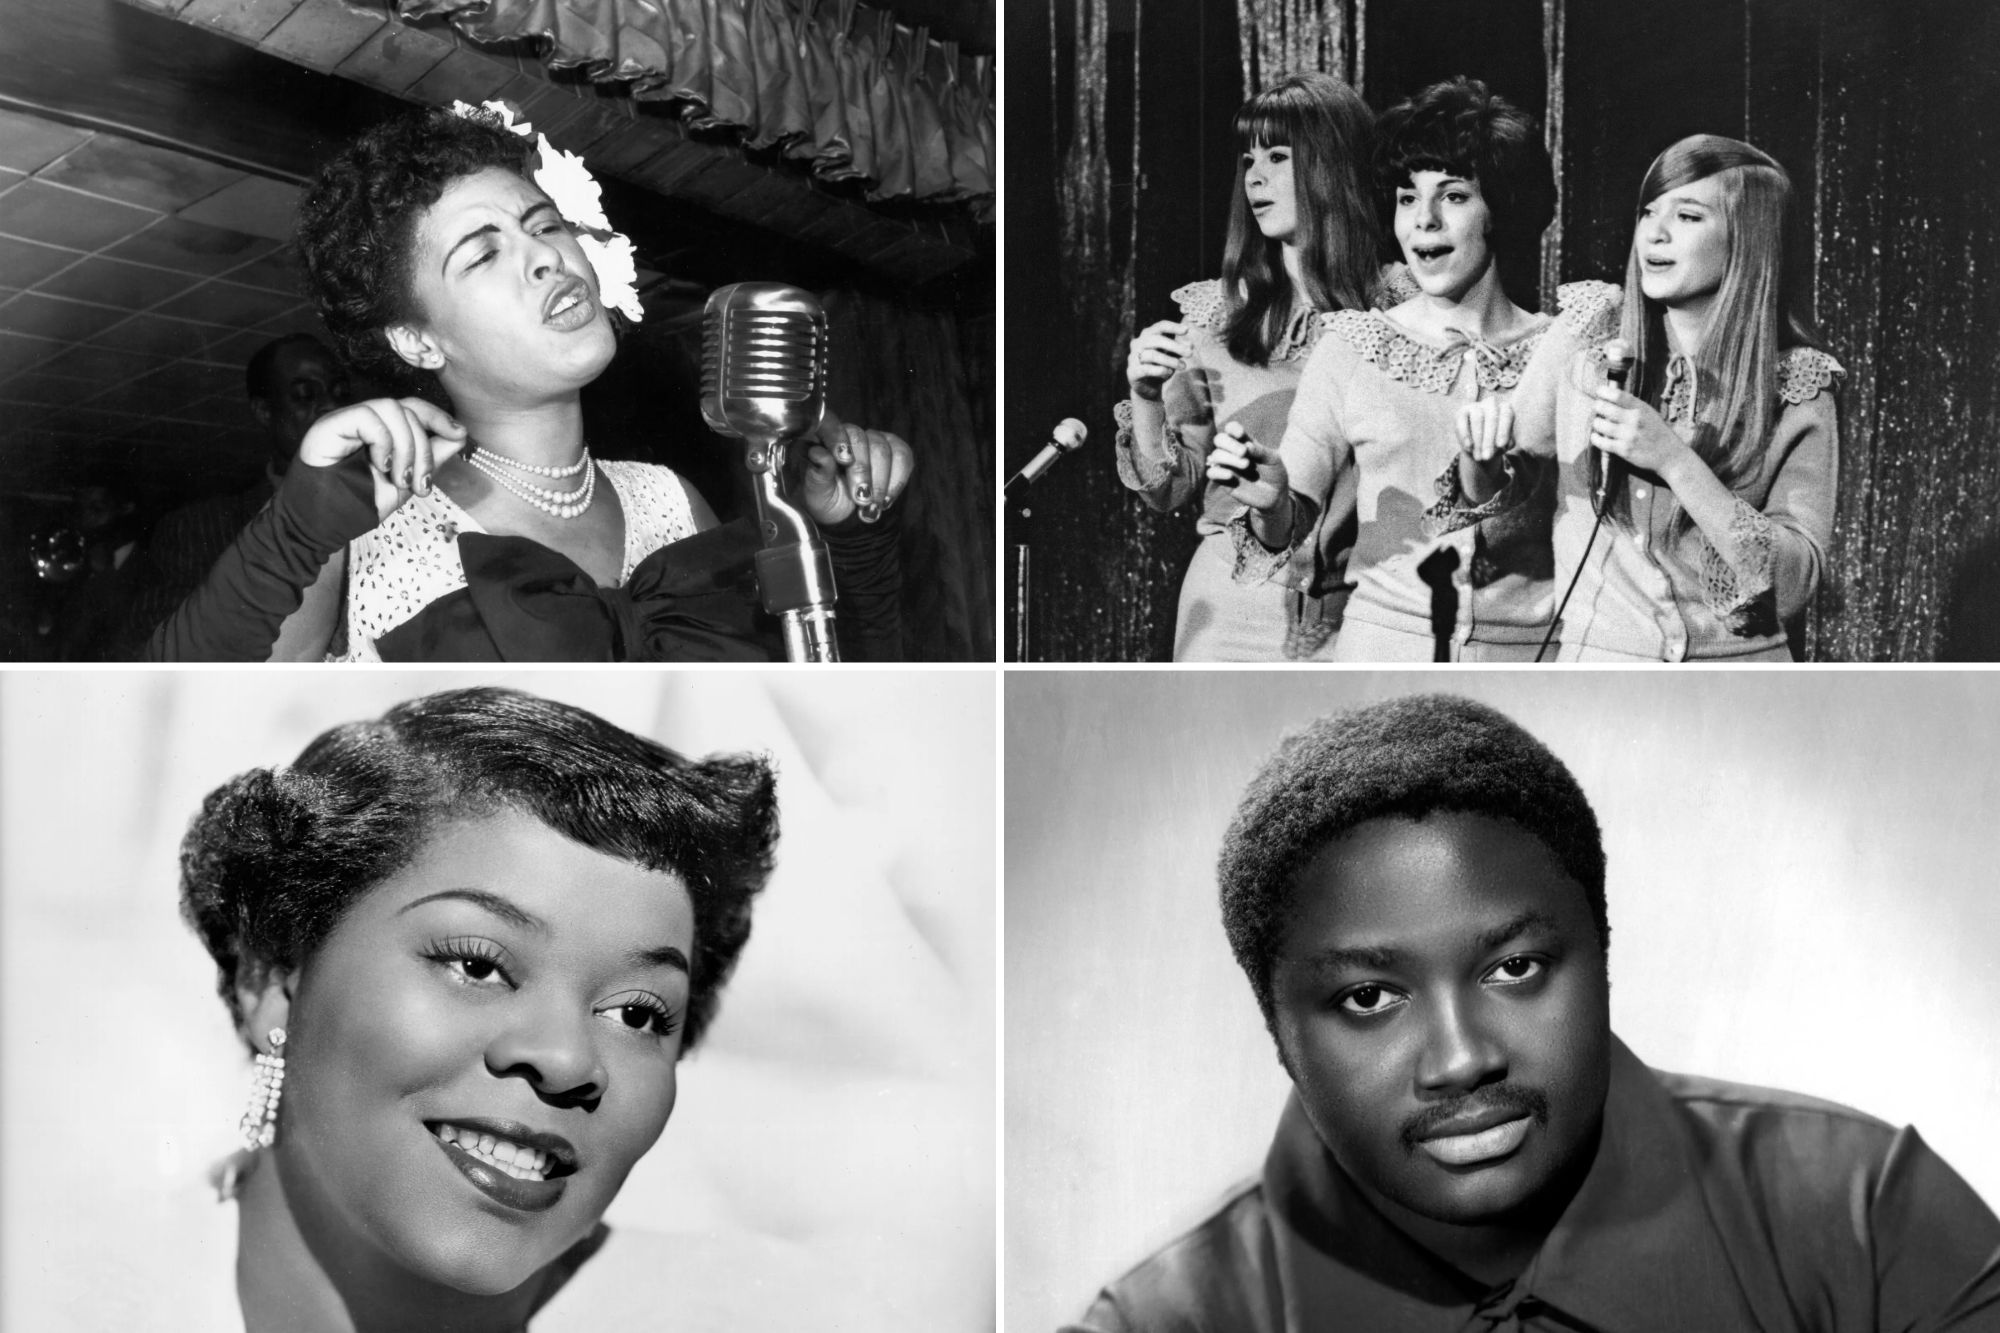 The biopic includes music from Amy's favourite singers, including (clockwise from top left) Billie Holiday, The Shangri-las, Donny Hathaway and Dinah Washington